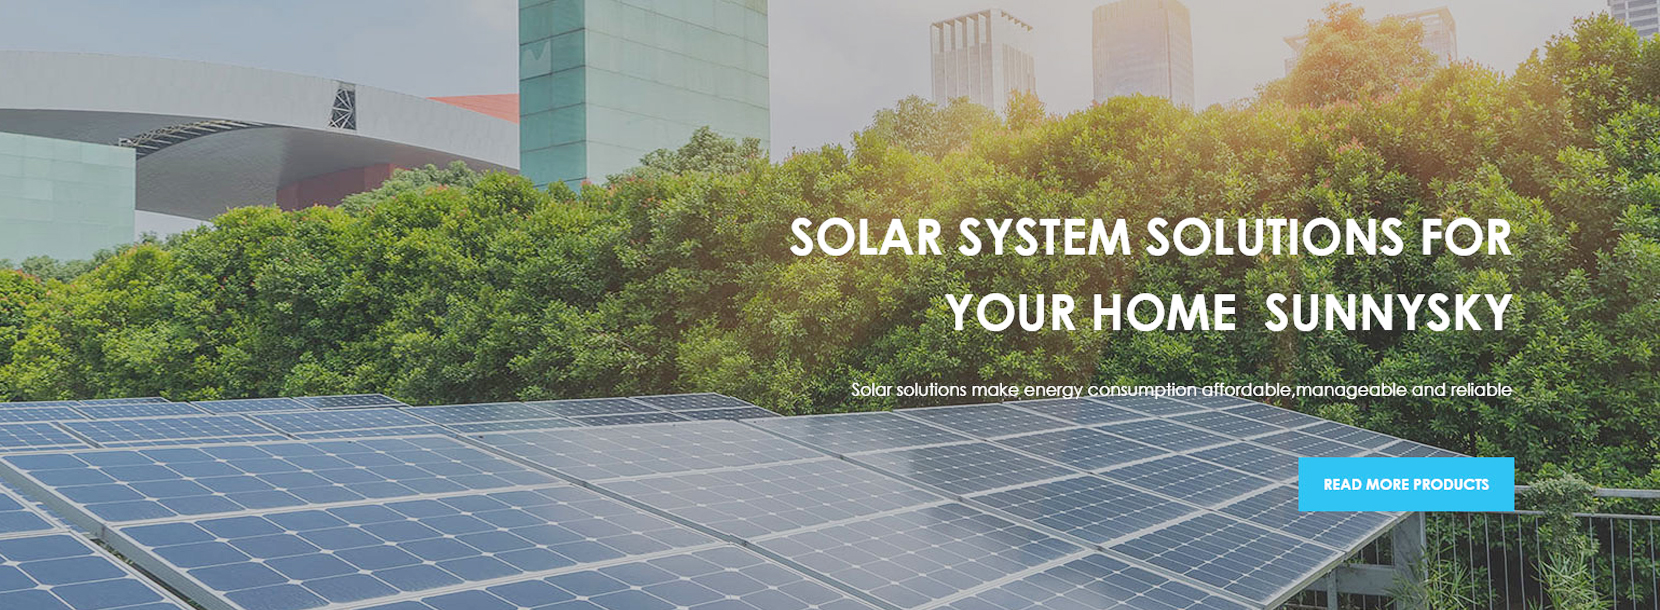 Complete Solar Power System